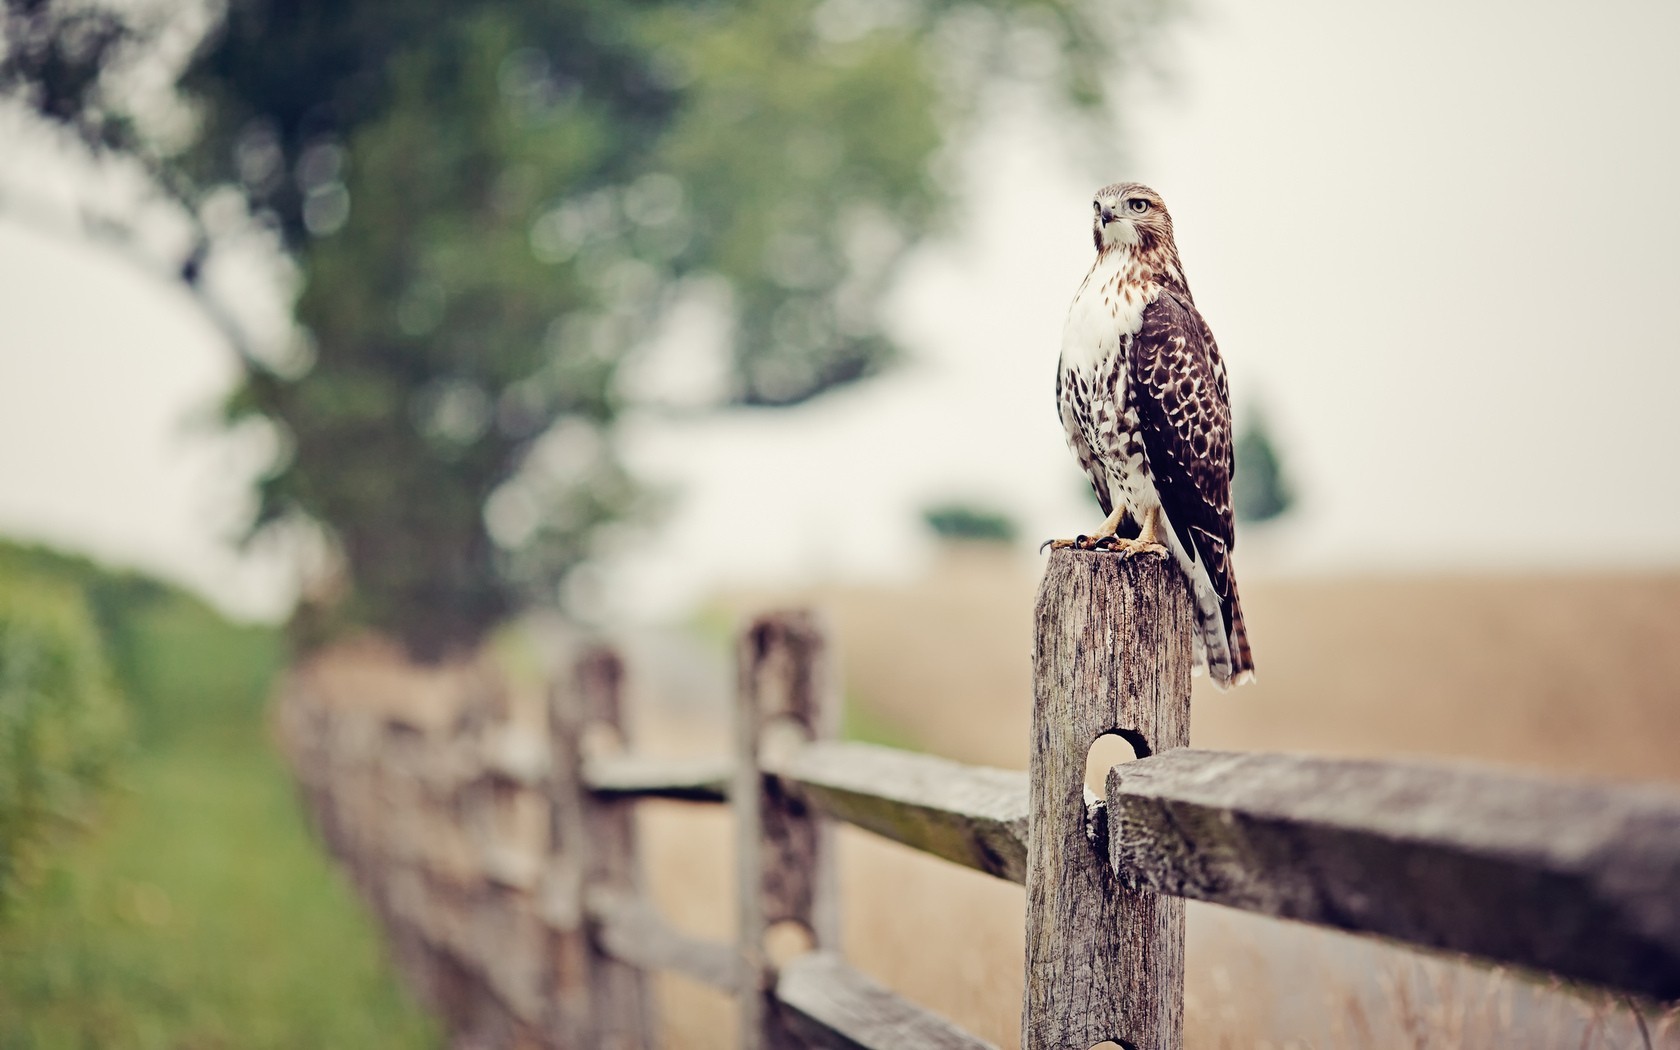 General 1680x1050 depth of field falcons fence birds nature animals outdoors